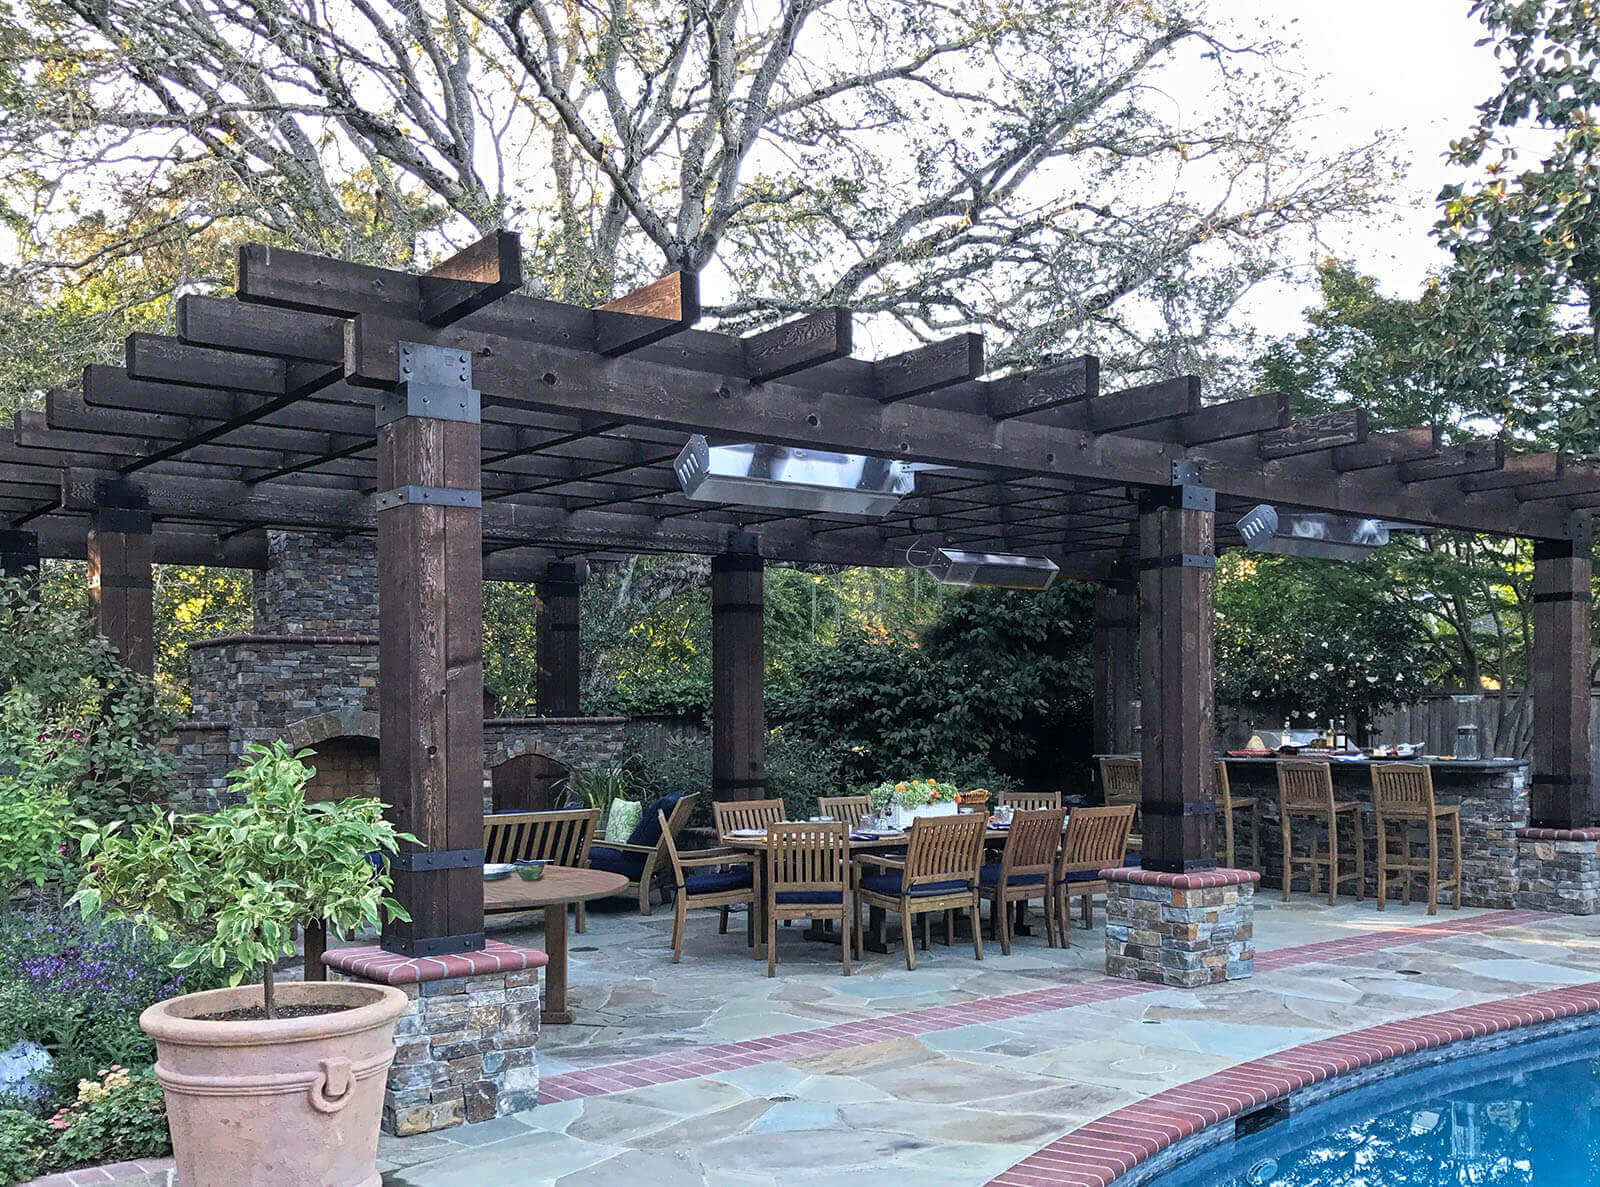 Rustic wood pergola with stone and brick detailing shelters an outdoor dining area with stone fireplace and outdoor bar, on a poolside patio with matching stone and brick details